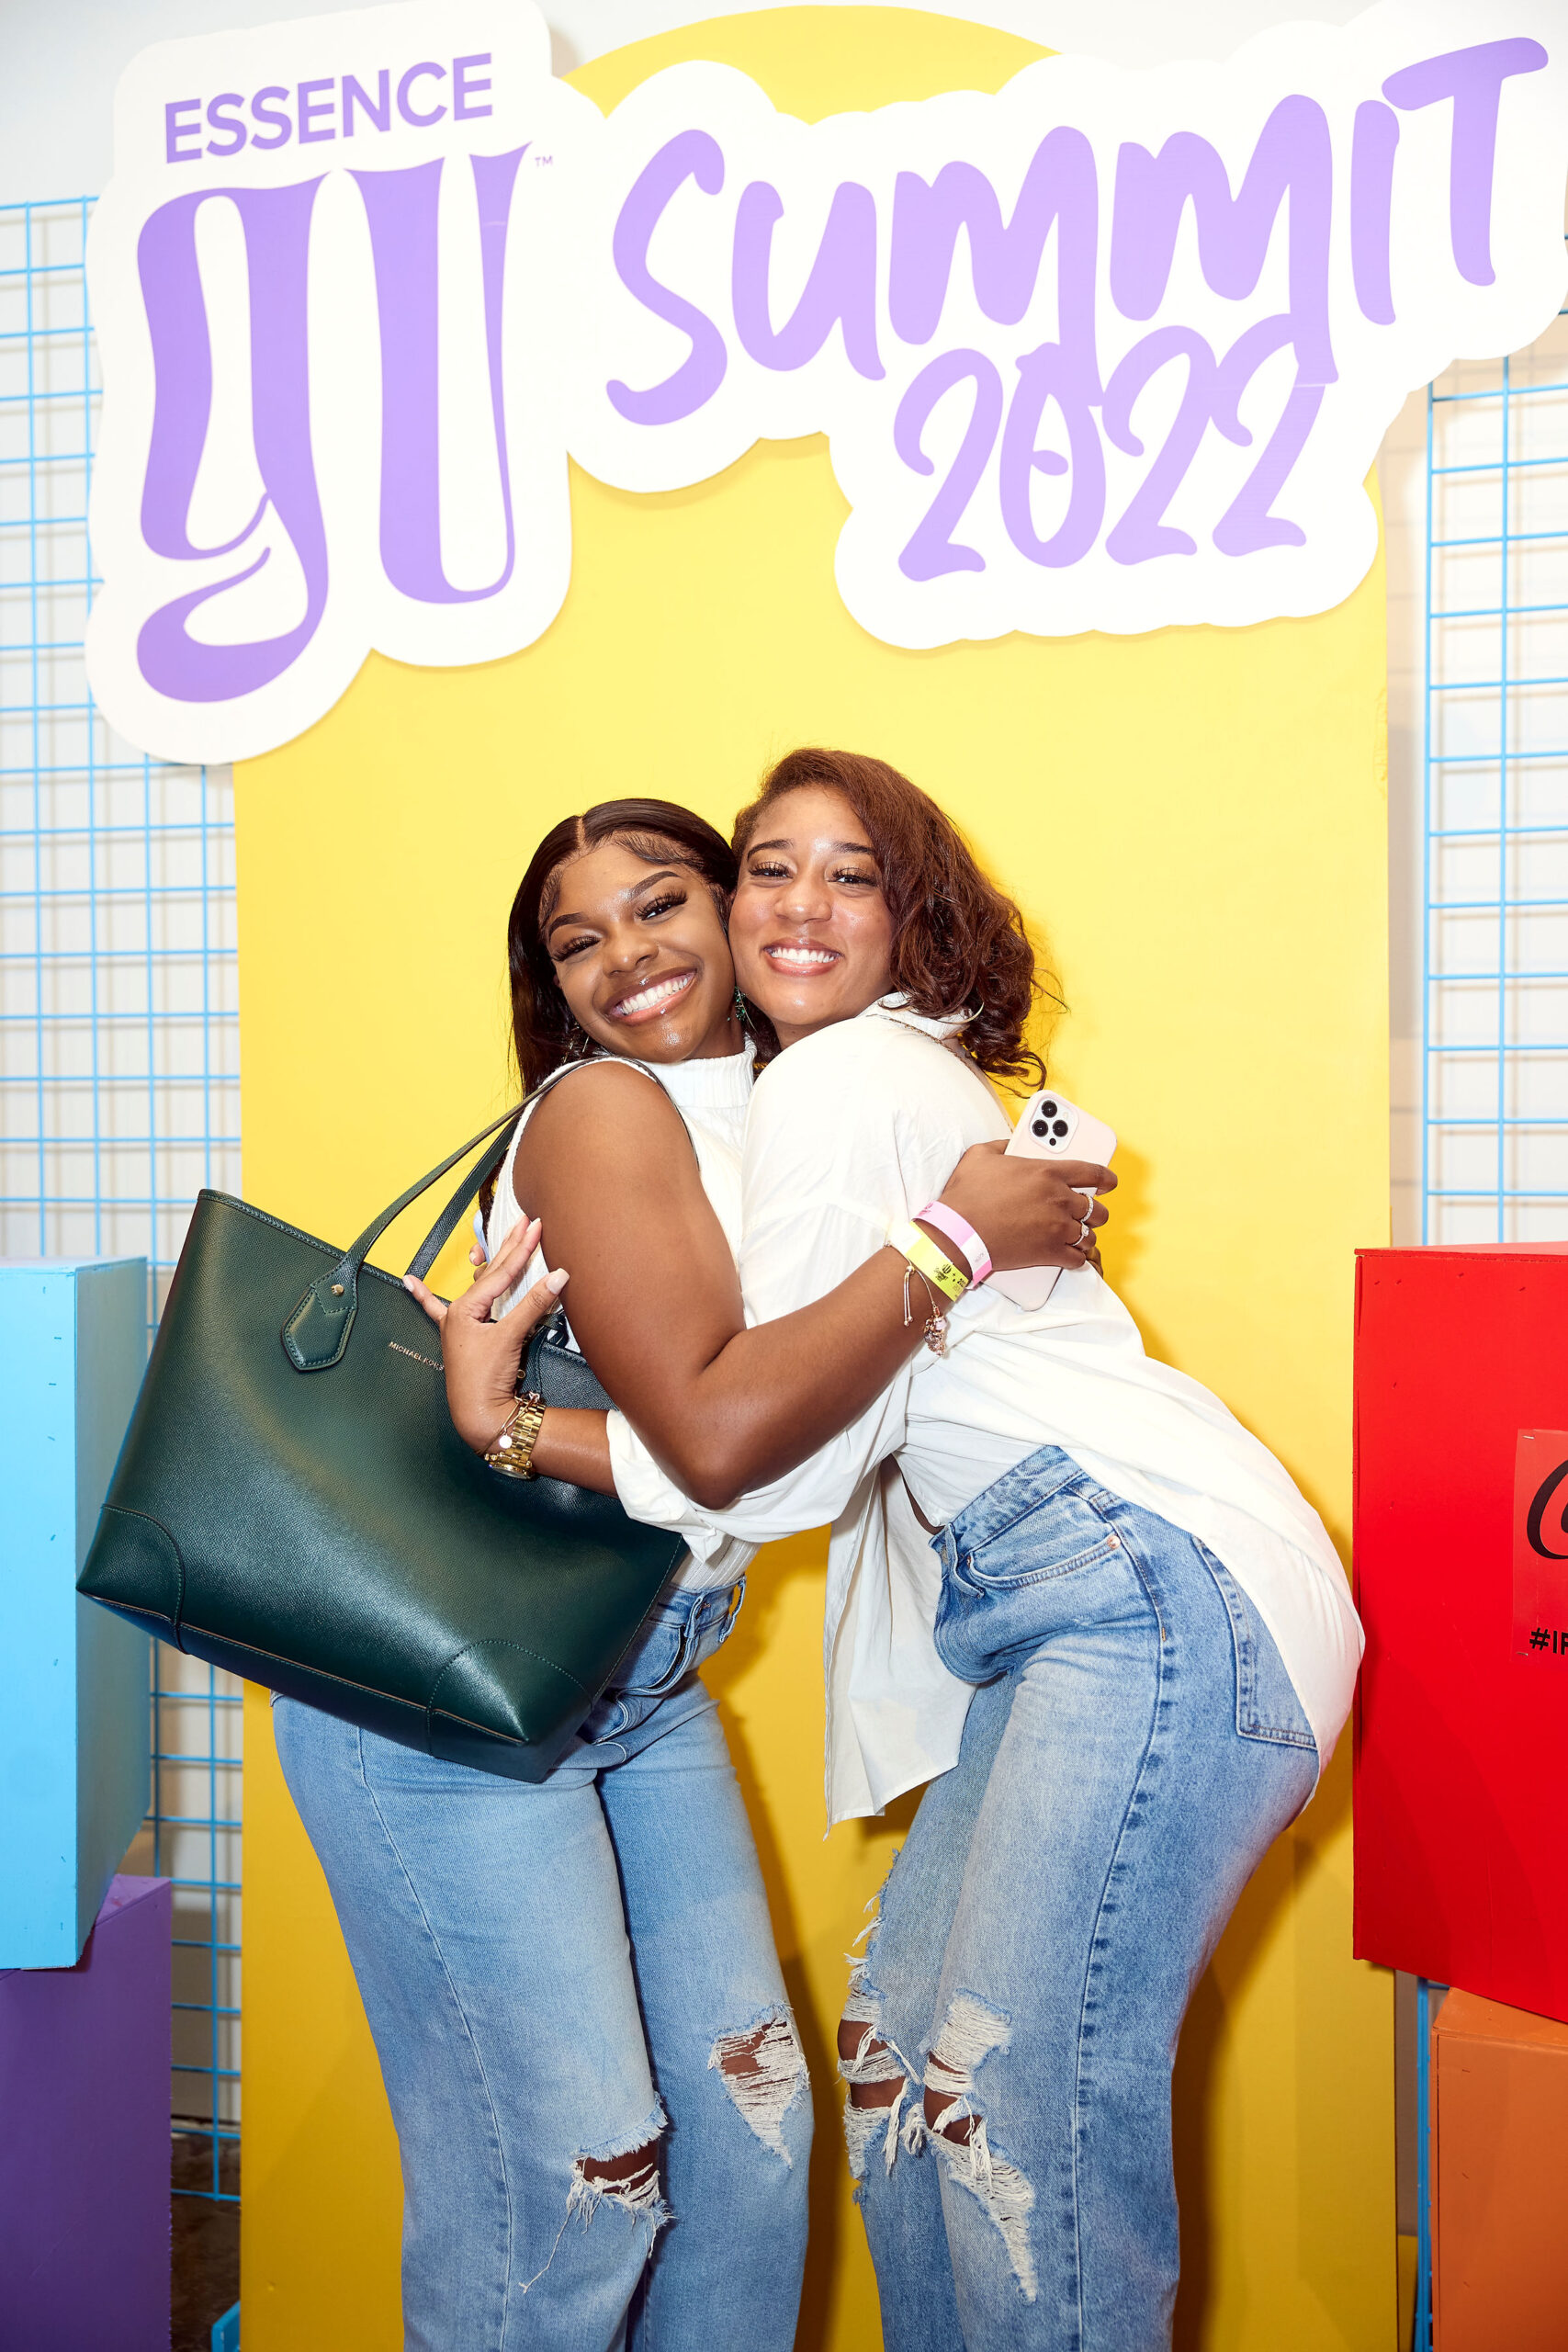 The Street Style At Girls United Summit 2022 Will Make You Reevaluate Your Fashion Closet